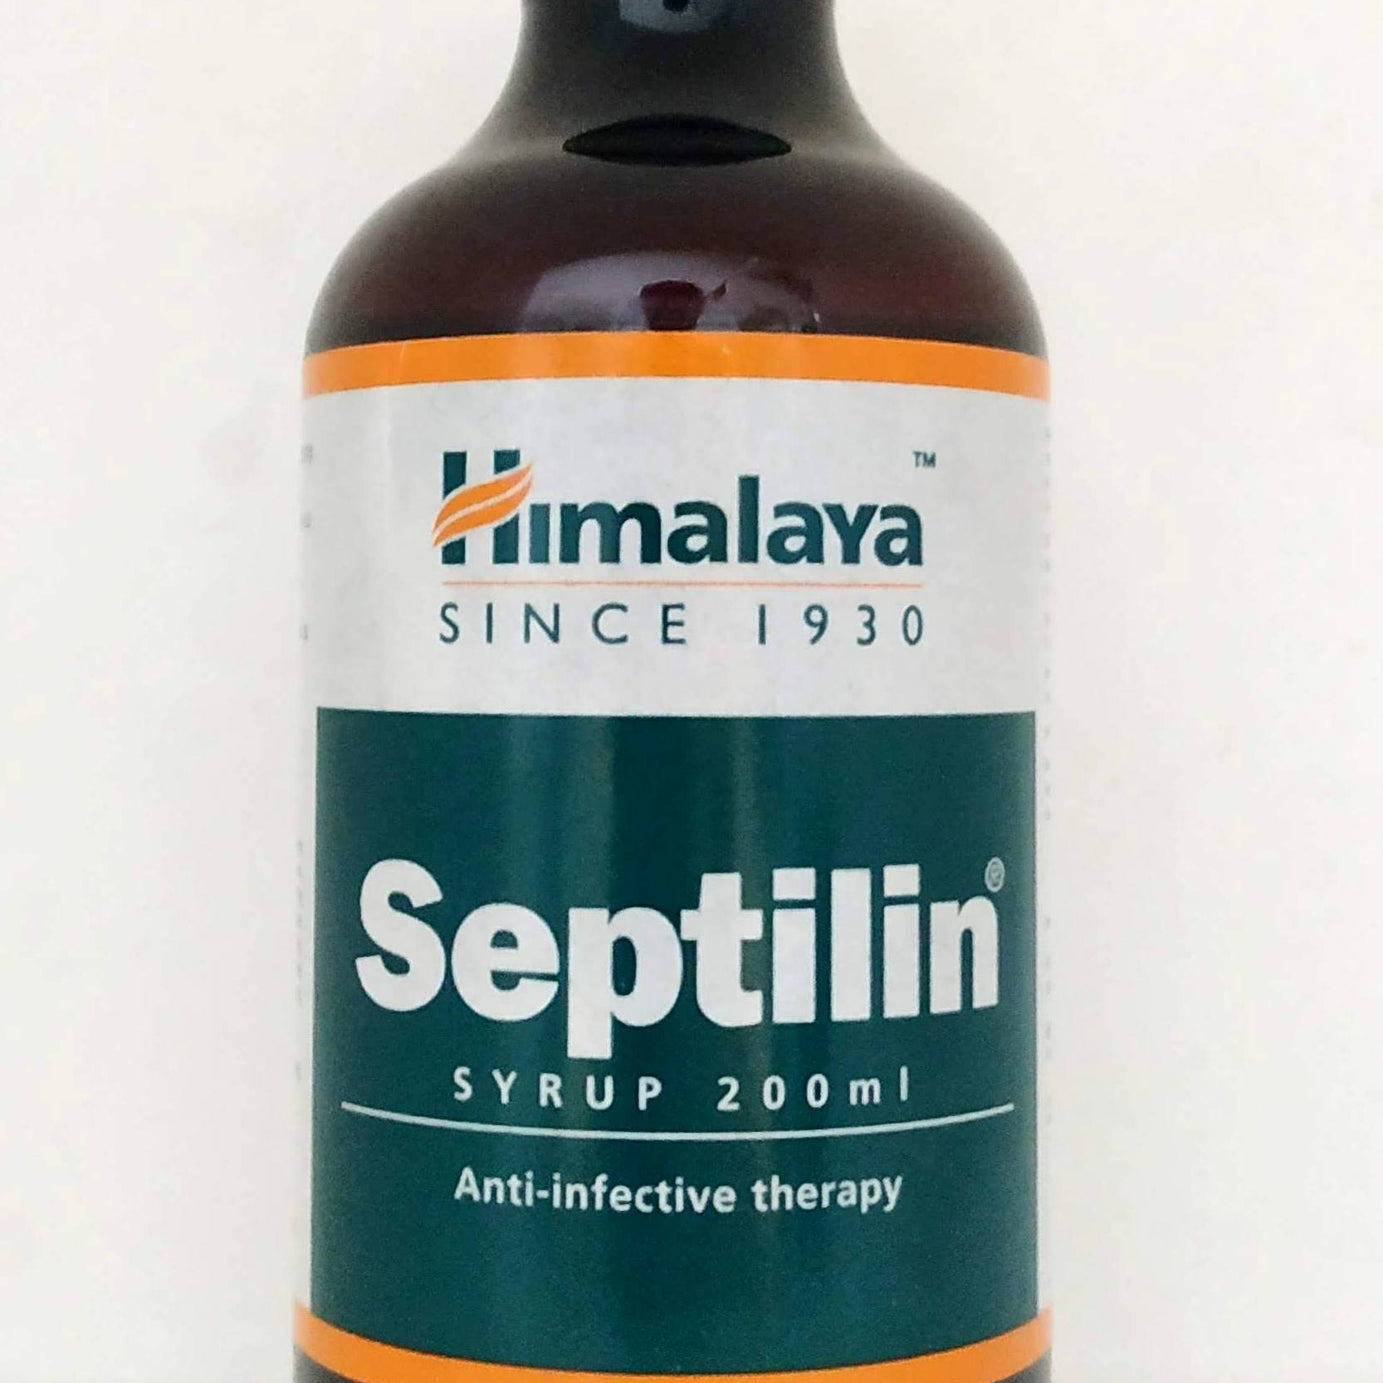 Shop Septilin Syrup 200ml at price 130.00 from Himalaya Online - Ayush Care